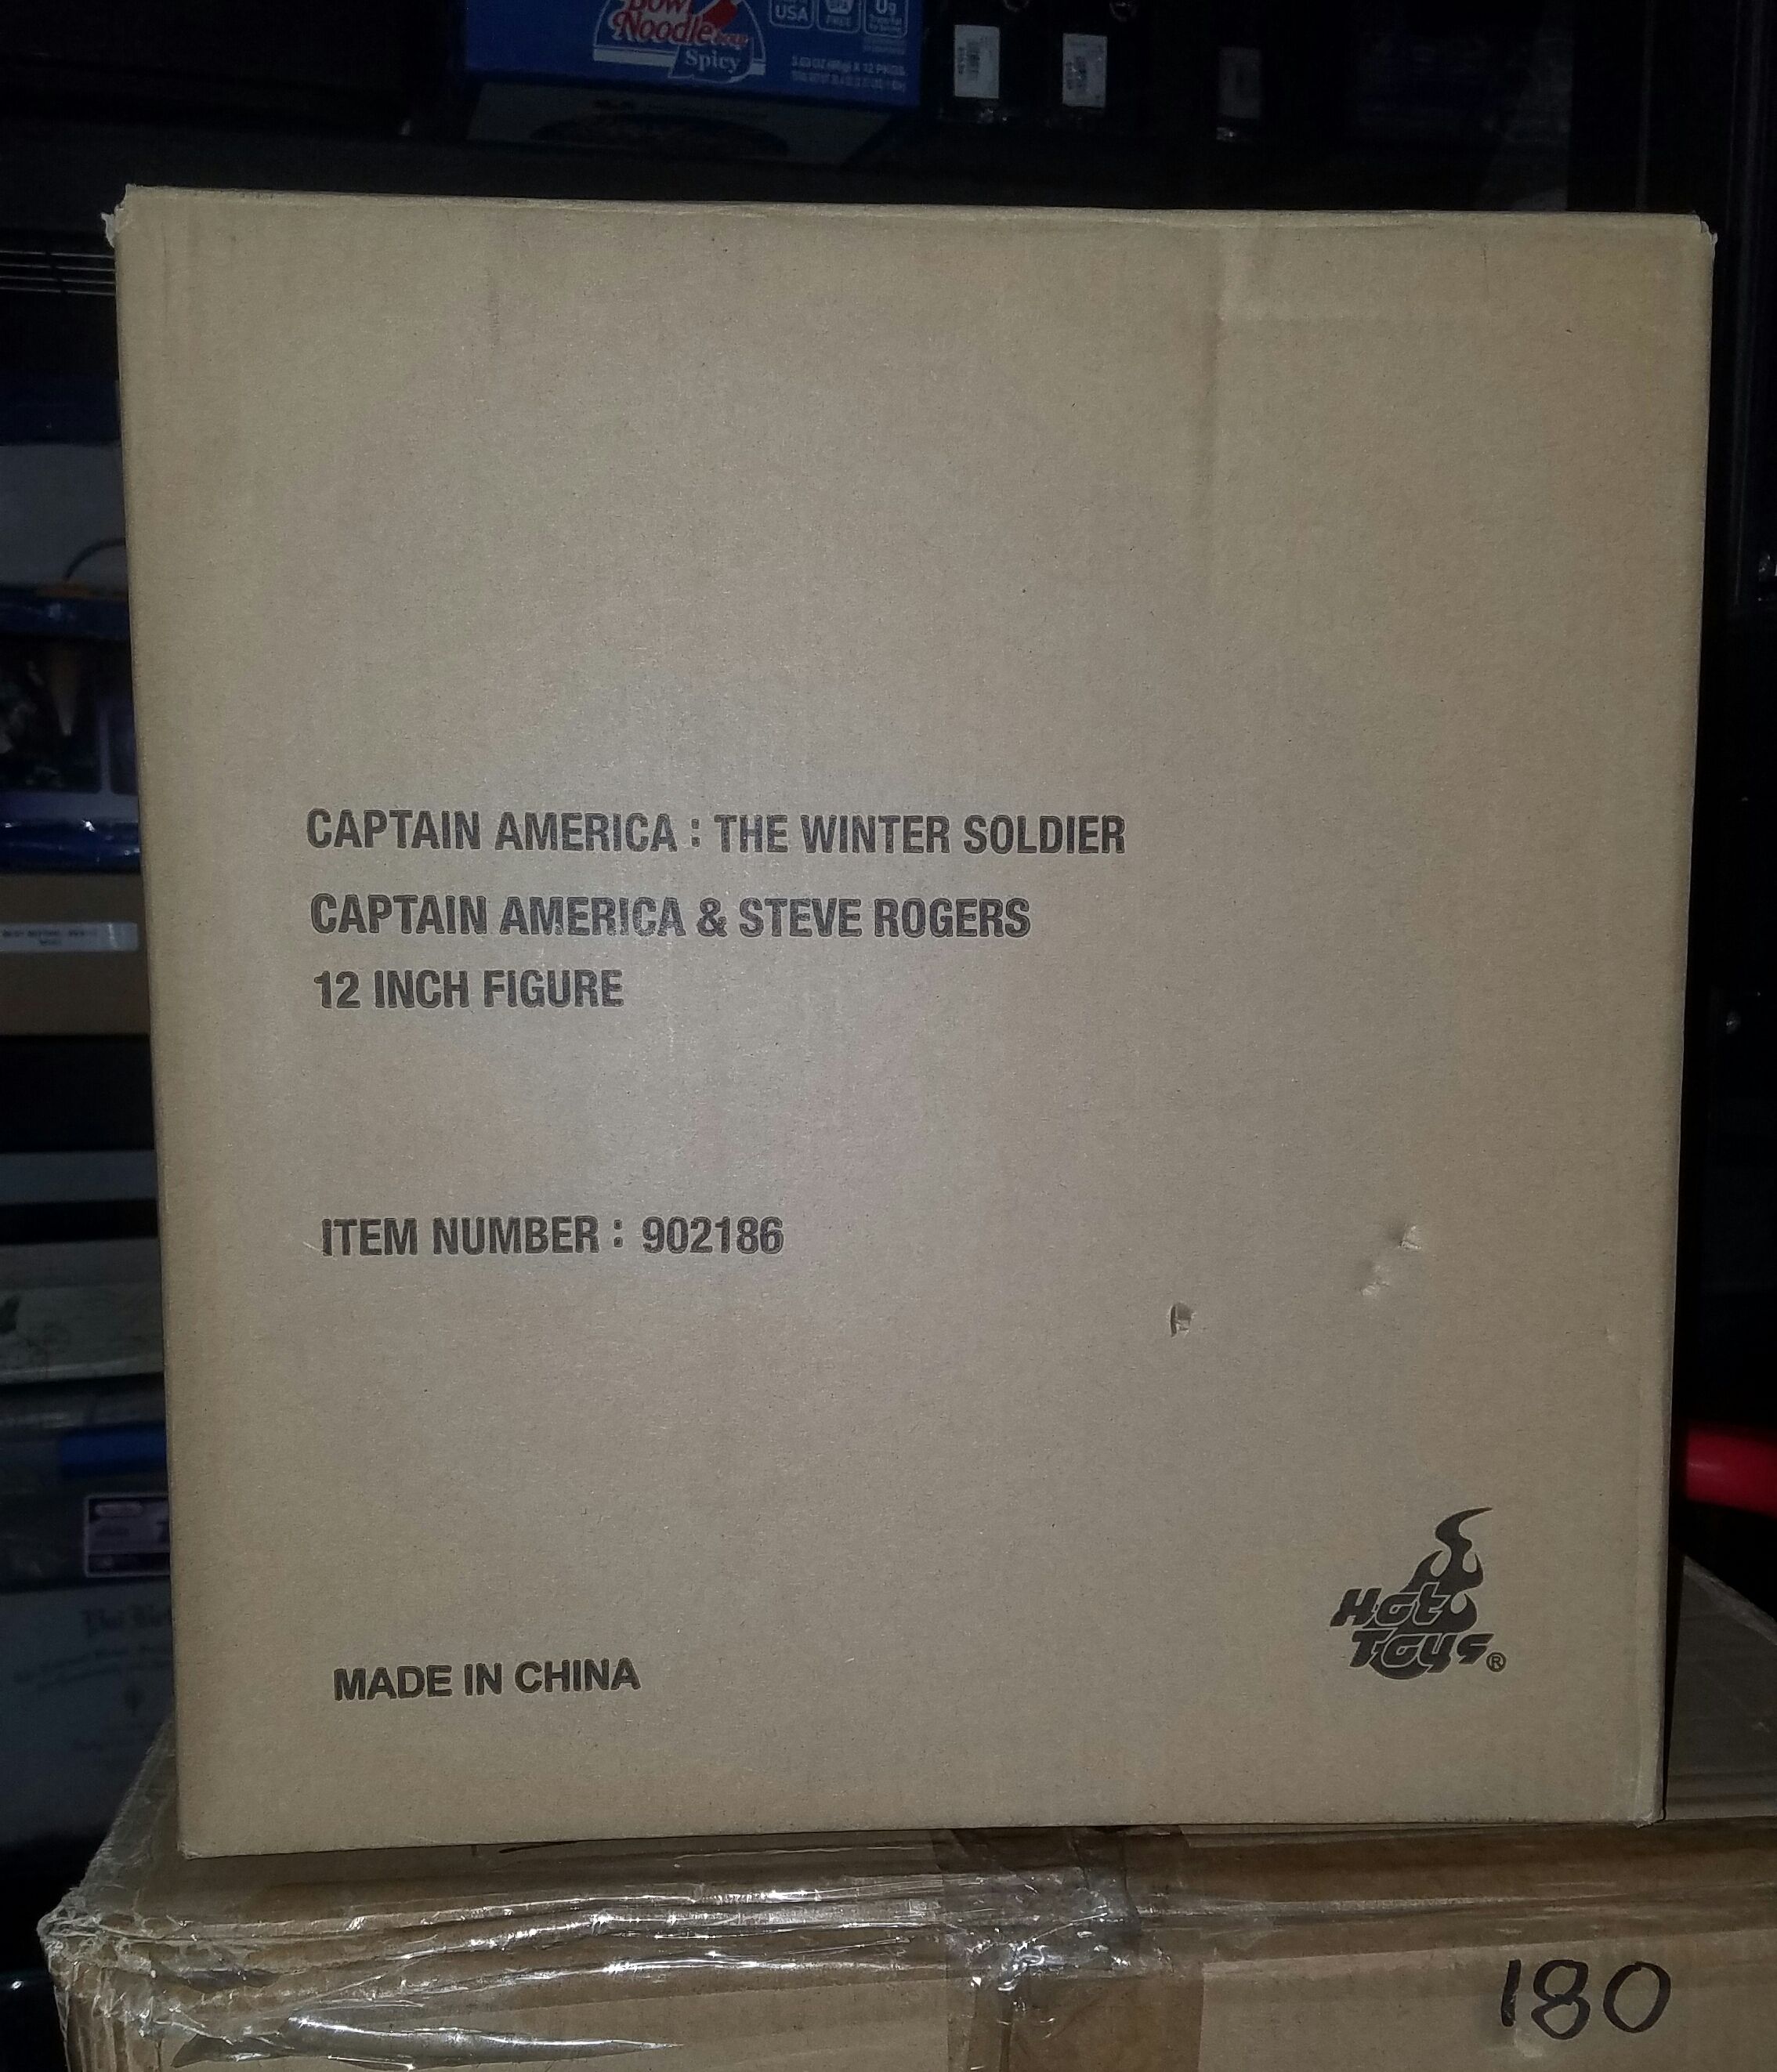 Hot Toys Captain America The Winter Soldier Steve Rogers and Captain America 1/6 Figure Sideshow